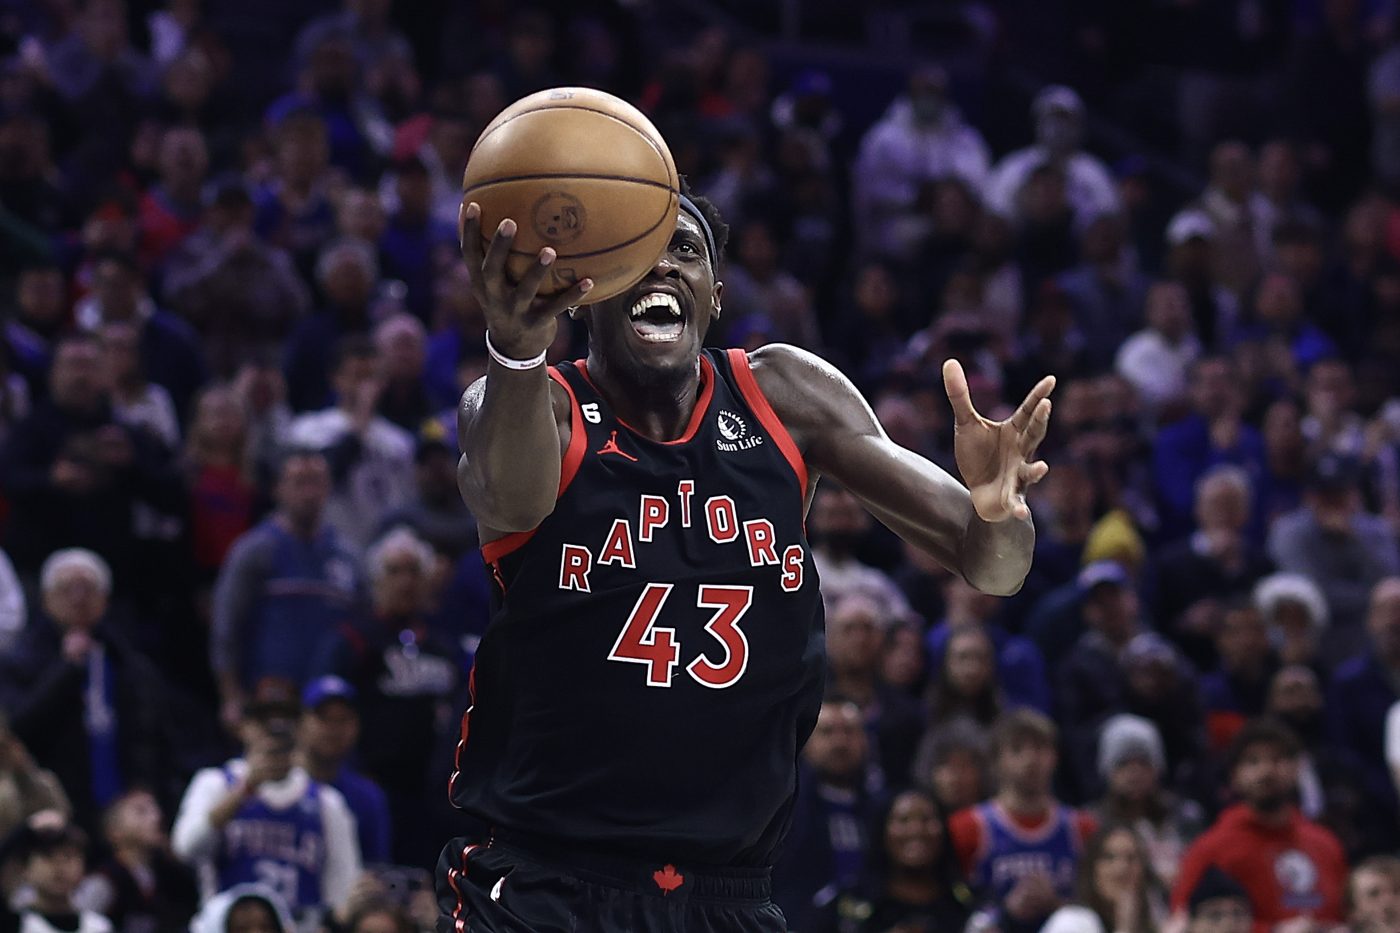 Pascal Siakam show, dalsze problemy Lakers i GSW